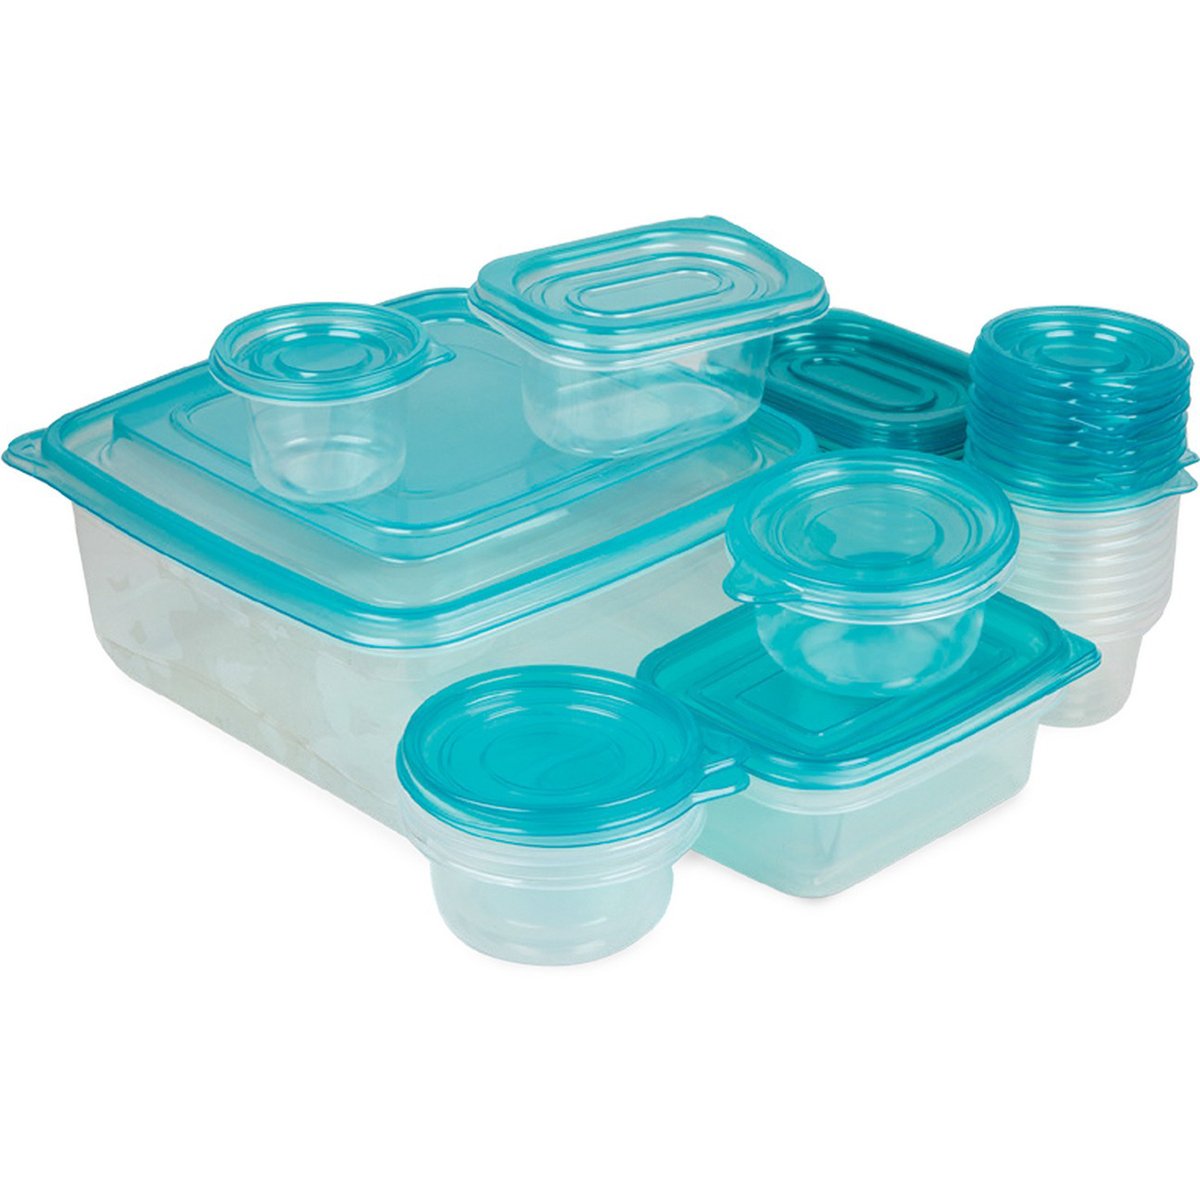 Lulu Food Container Set Assorted Color 23pcs